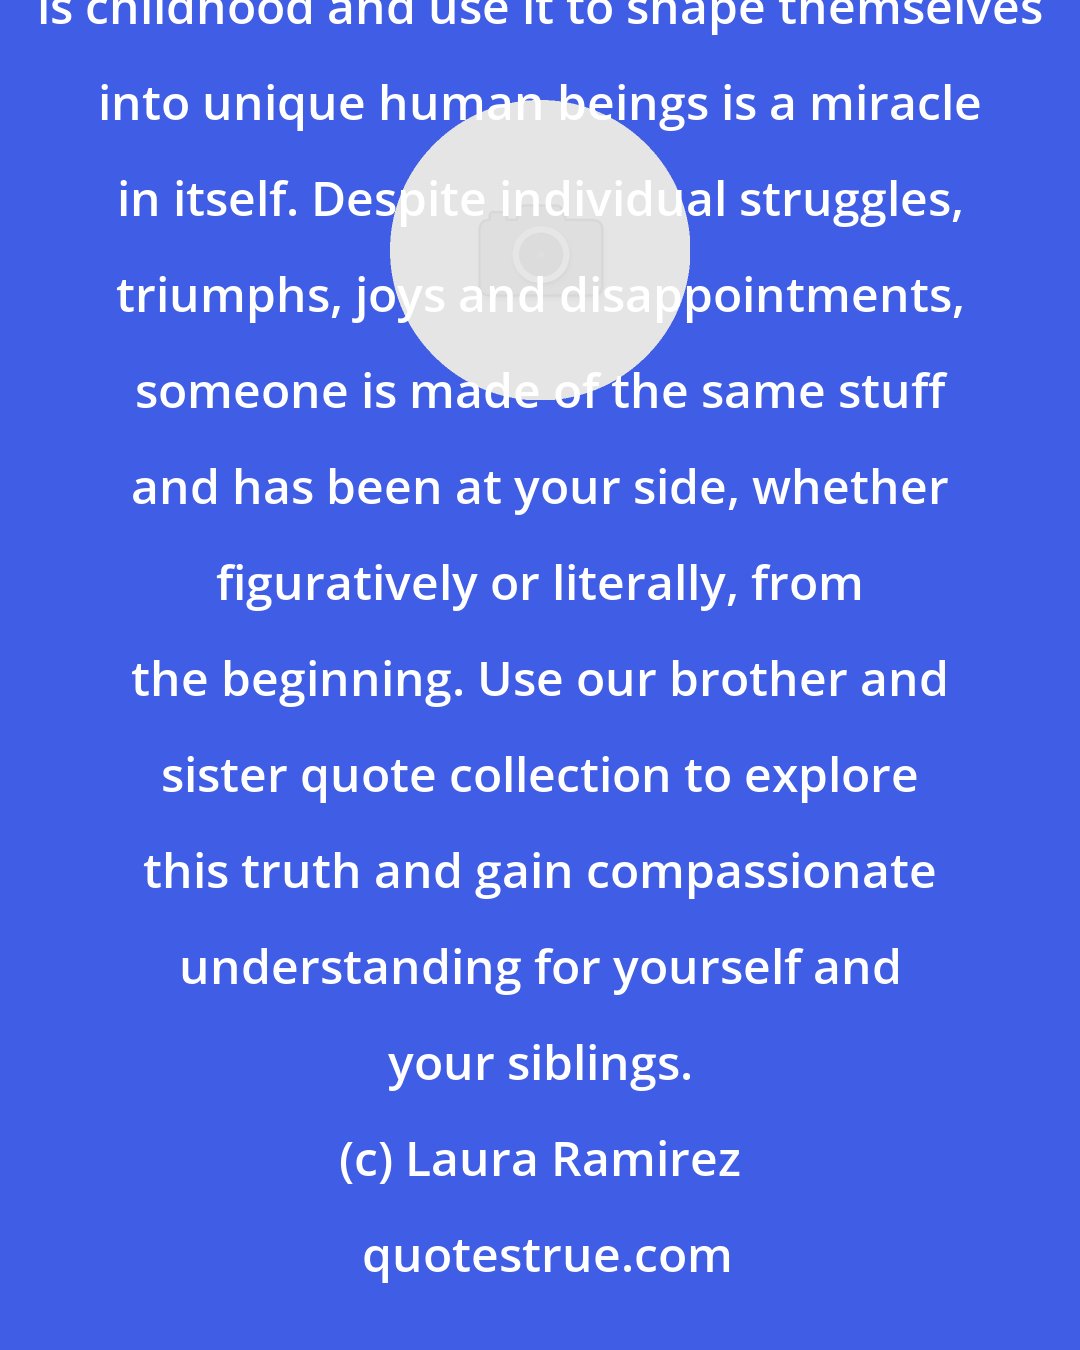 Laura Ramirez: We each deal with childhood in different ways. That brothers and sisters can take the same lump of clay that is childhood and use it to shape themselves into unique human beings is a miracle in itself. Despite individual struggles, triumphs, joys and disappointments, someone is made of the same stuff and has been at your side, whether figuratively or literally, from the beginning. Use our brother and sister quote collection to explore this truth and gain compassionate understanding for yourself and your siblings.